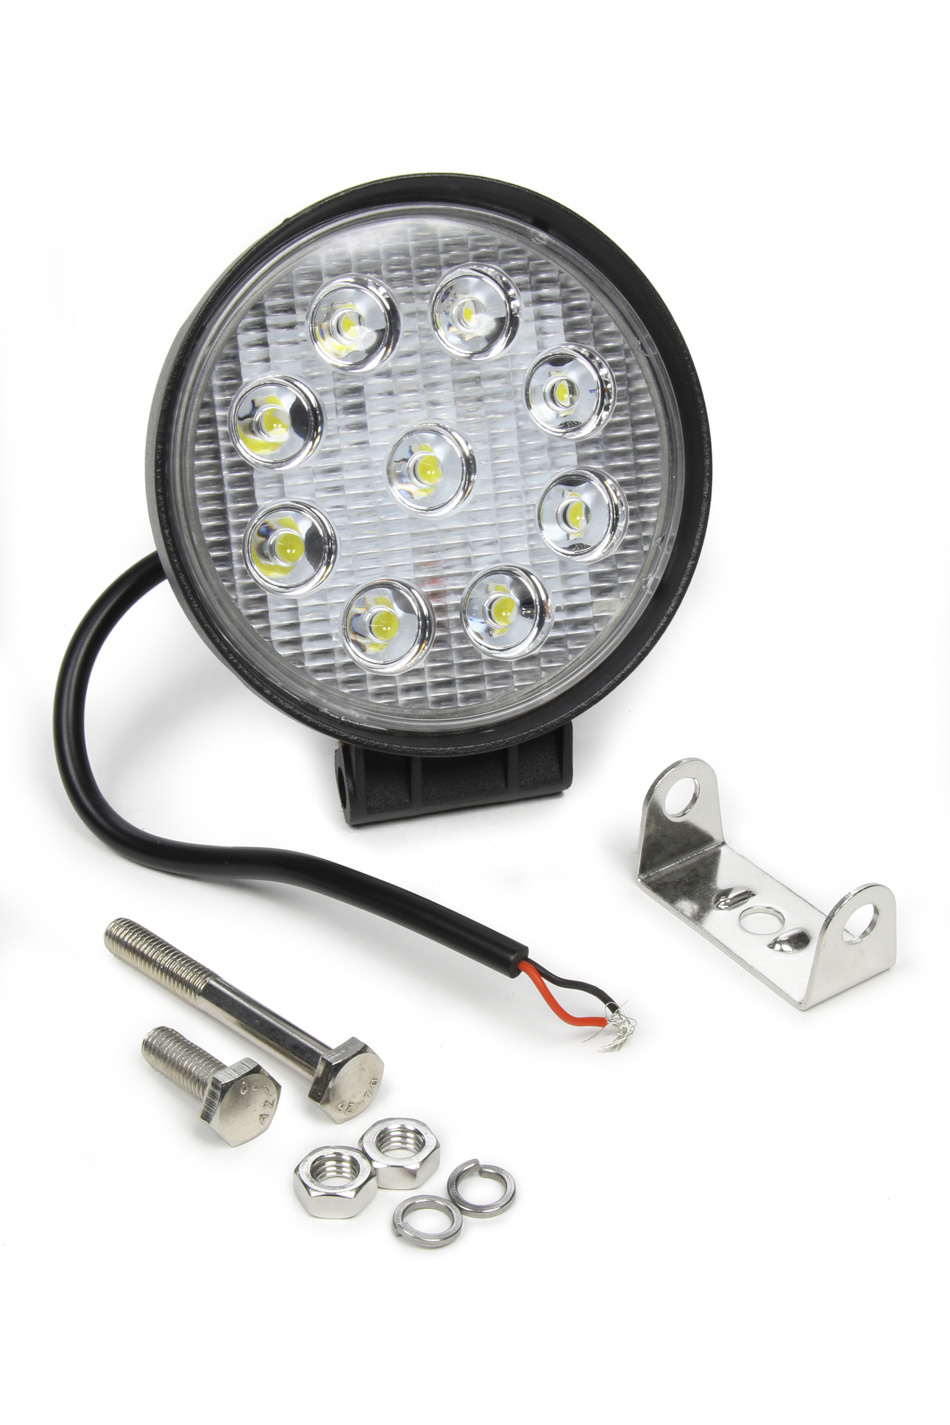 Oracle LED Light Assembly,  Off-Road,  Spot,  24 Watts,  8 White LED,  4" Round,  Surface Mount,  Hardware Included,  Aluminum,